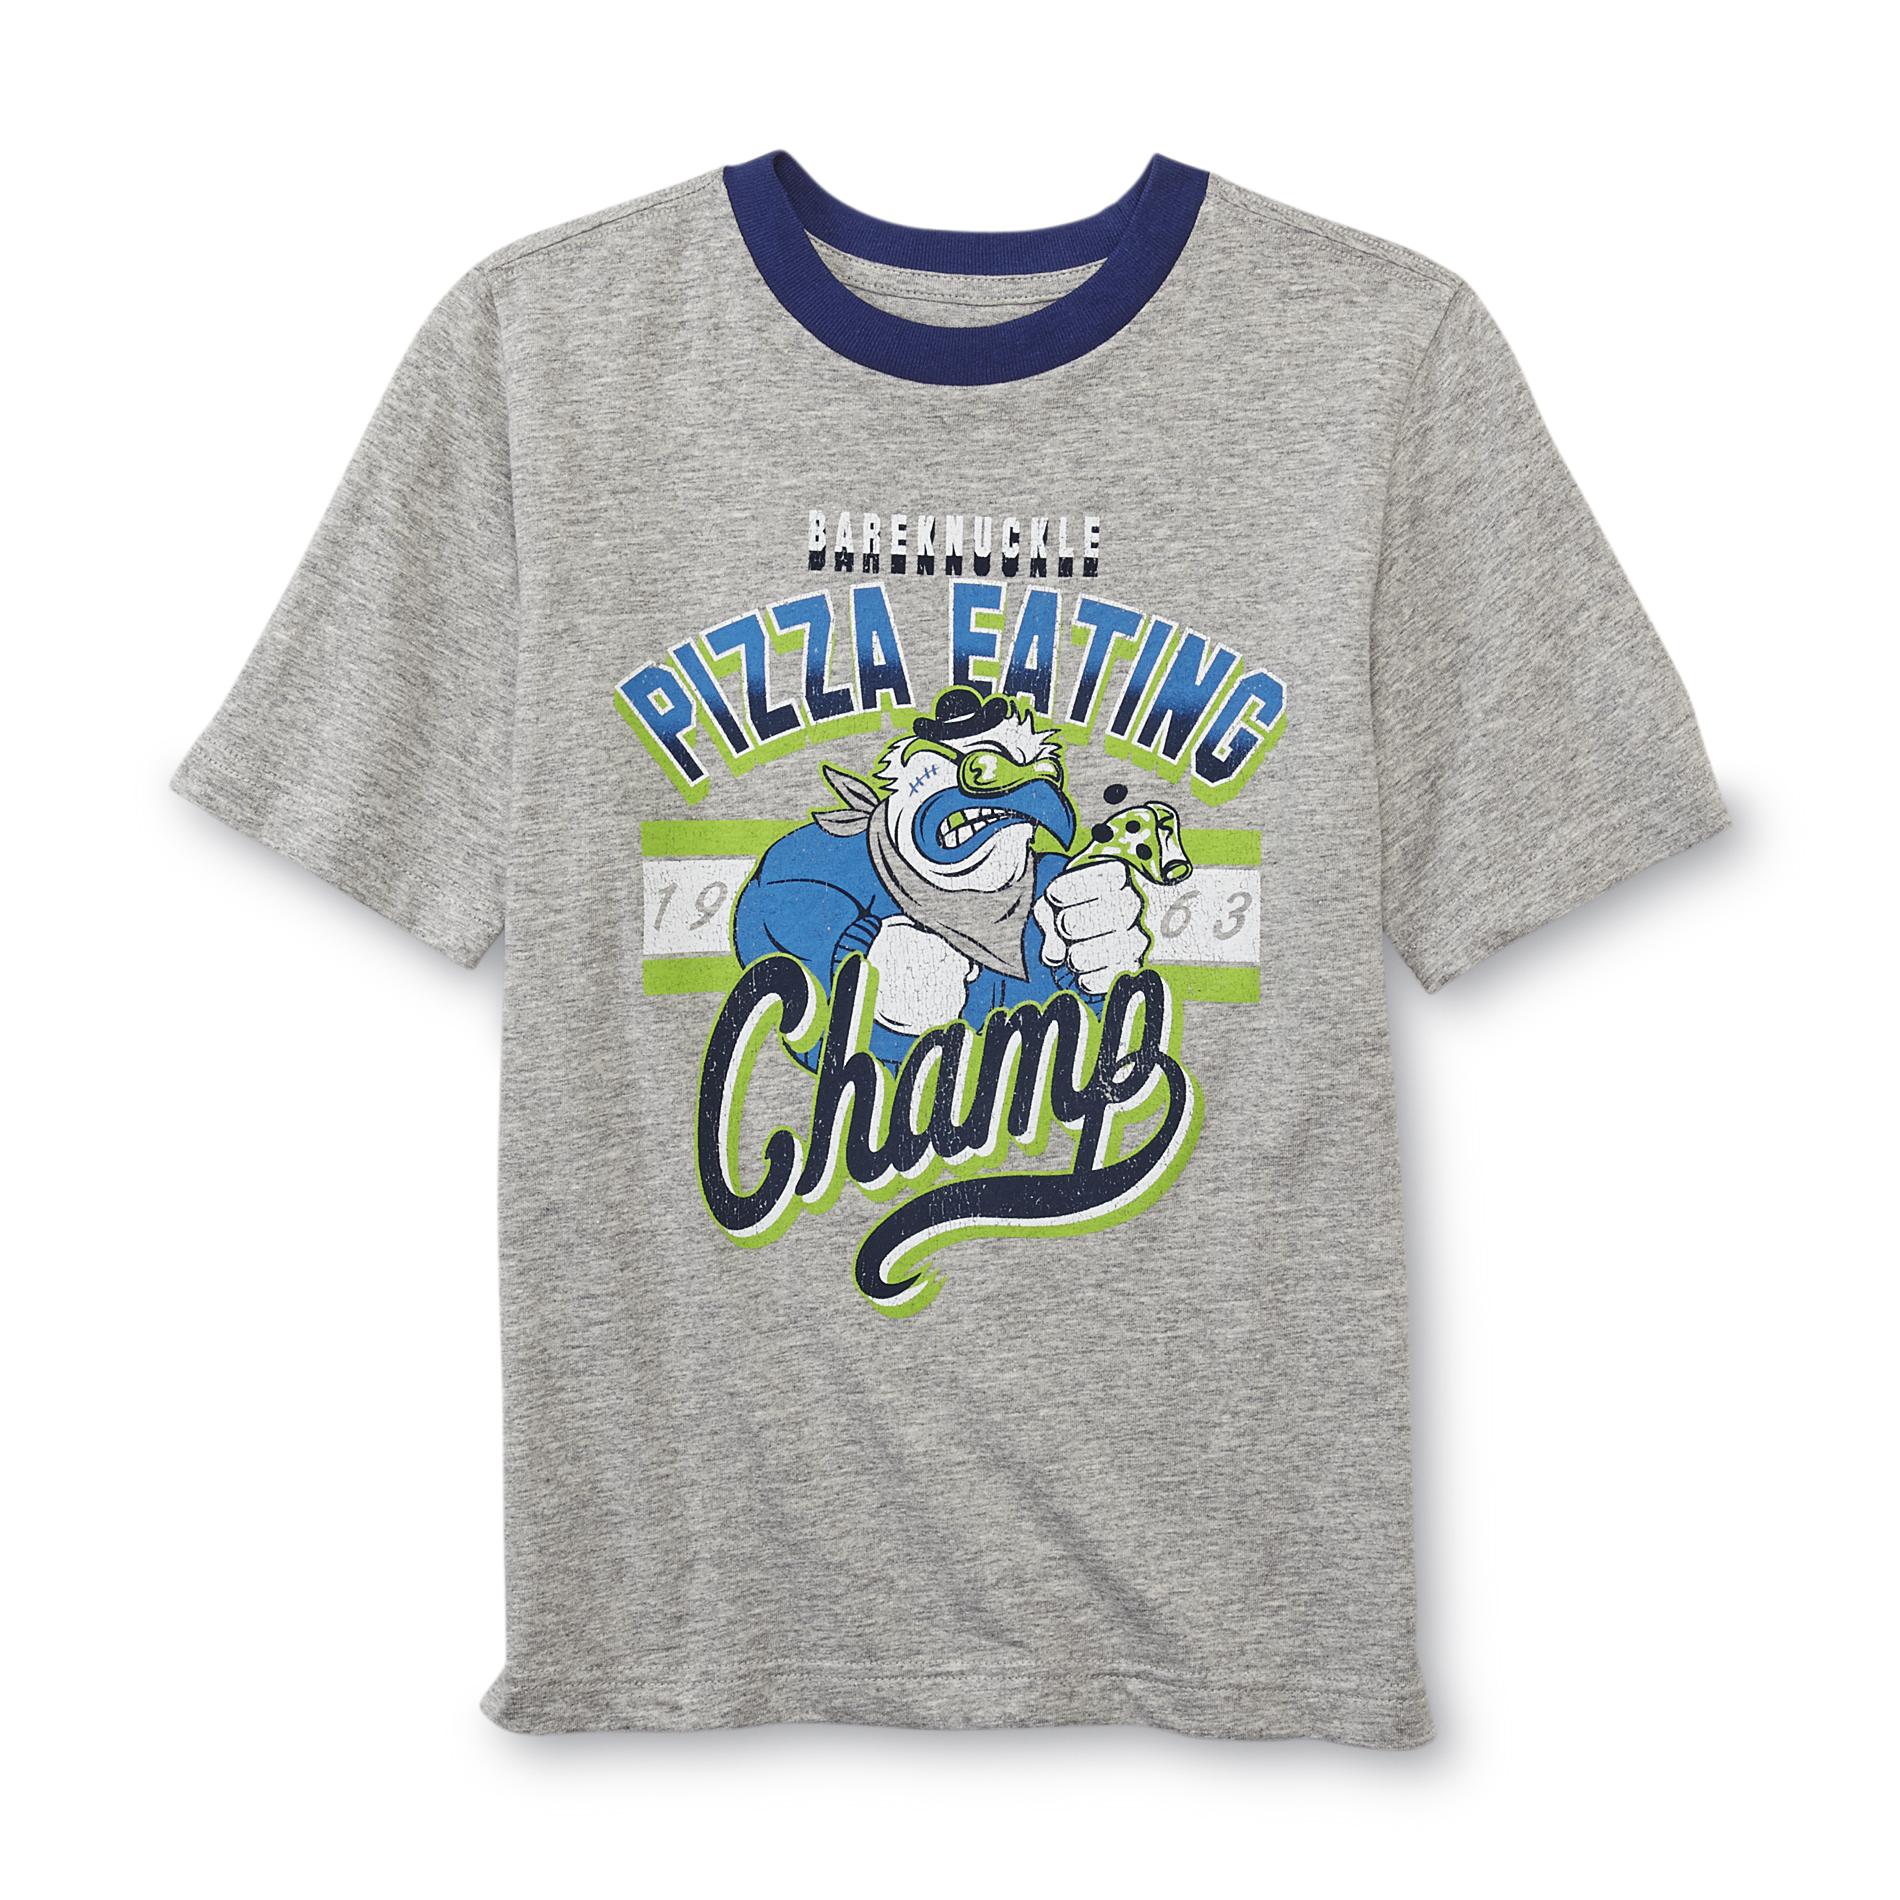 Basic Editions Boy's Graphic T-Shirt - Pizza Eating Champ